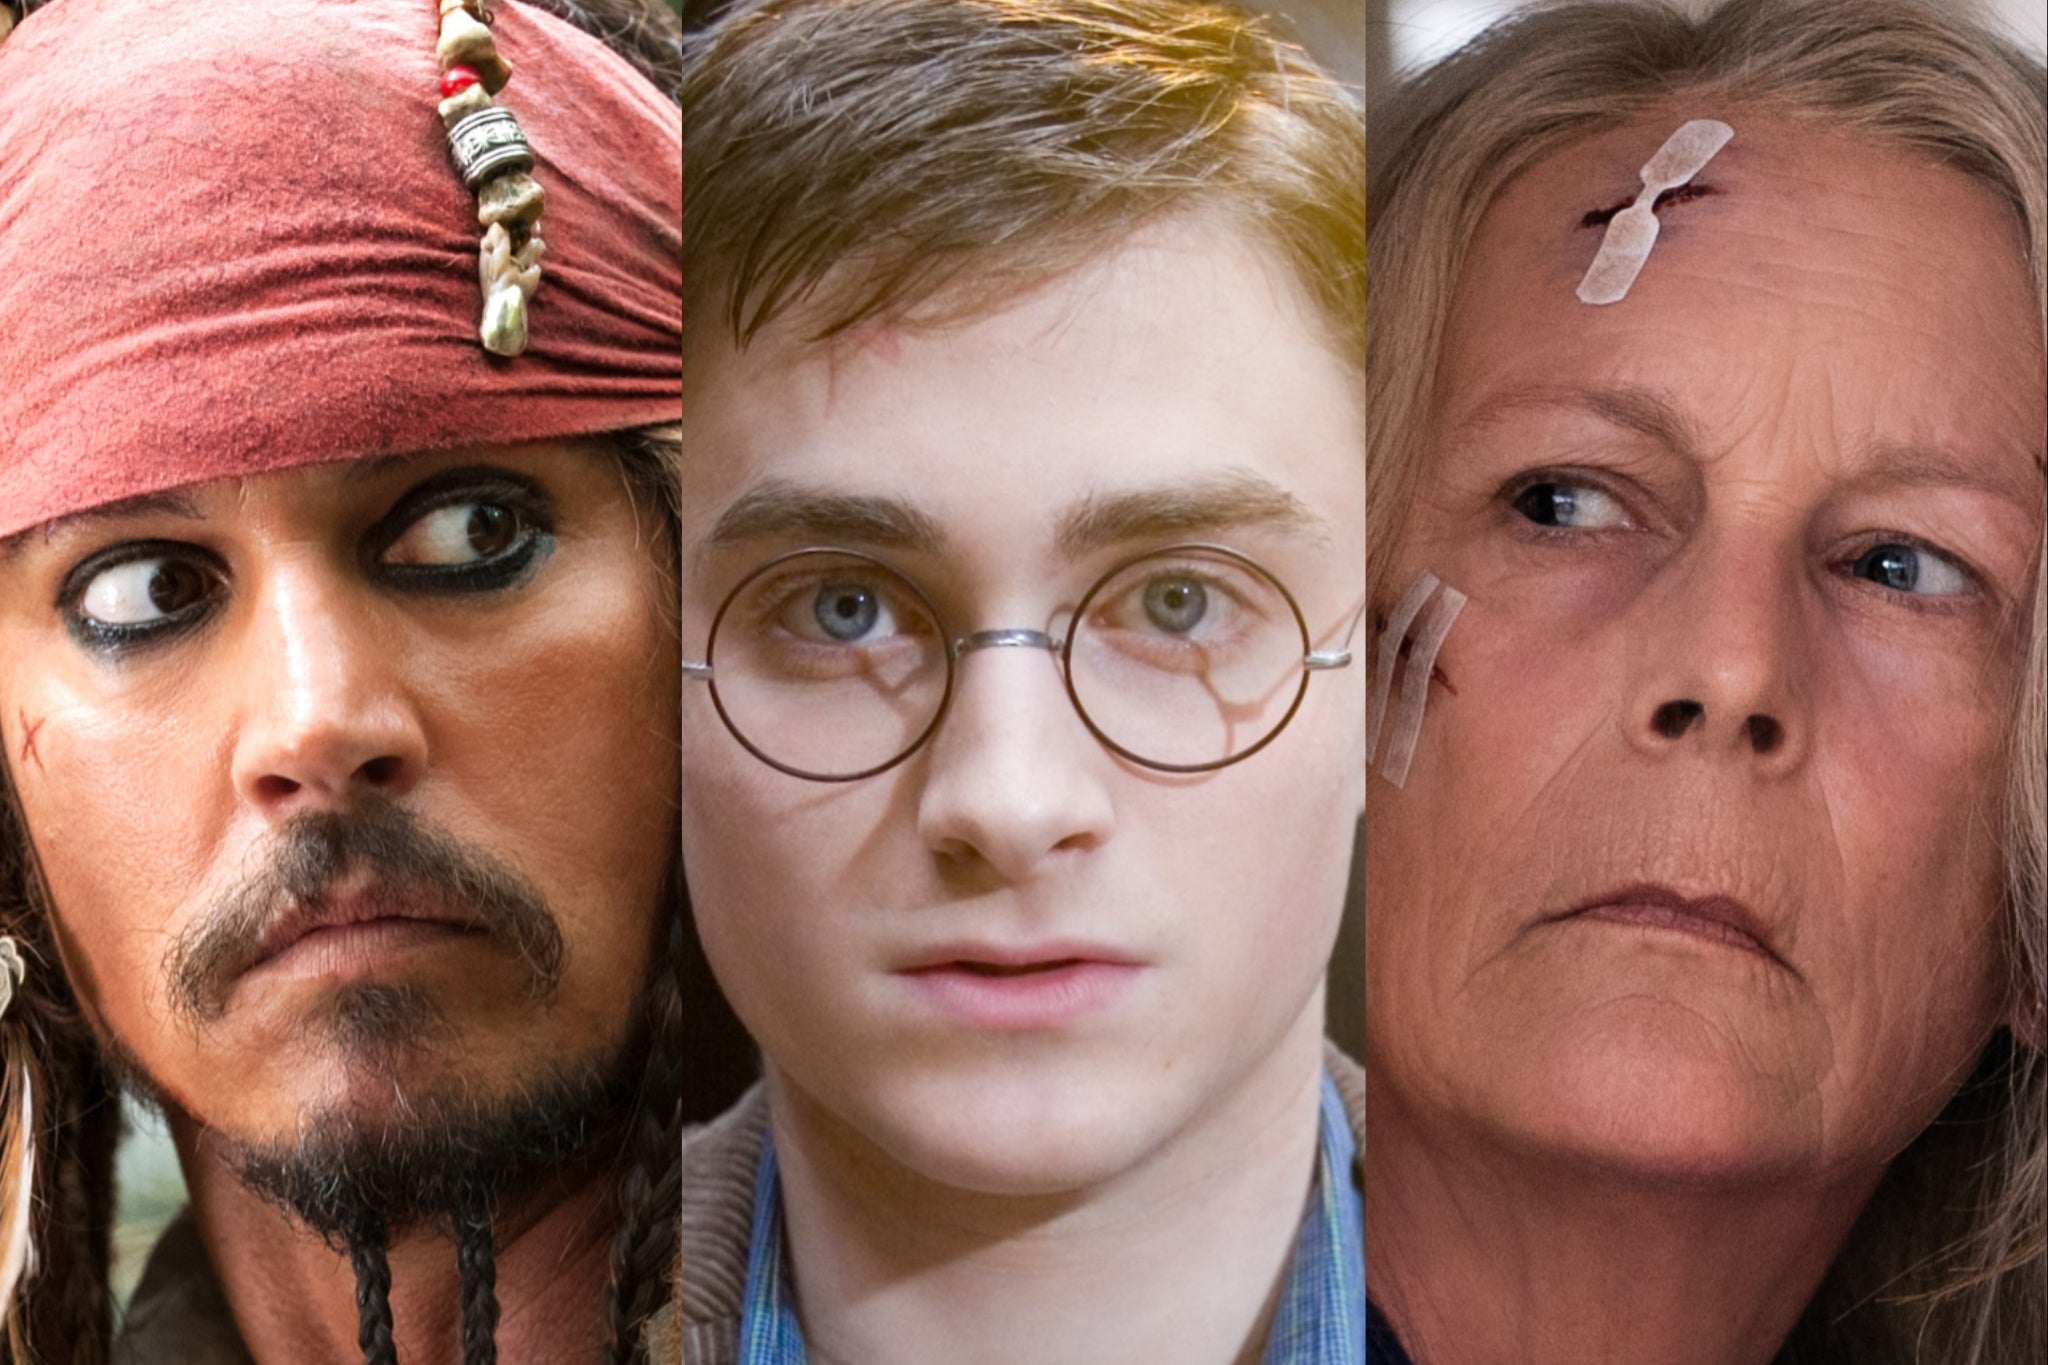 Johnny Depp in ‘Pirates of the Caribbean’, Daniel Radcliffe in ‘Harry Potter’ and Jamie Lee Curtis in ‘Halloween Ends'